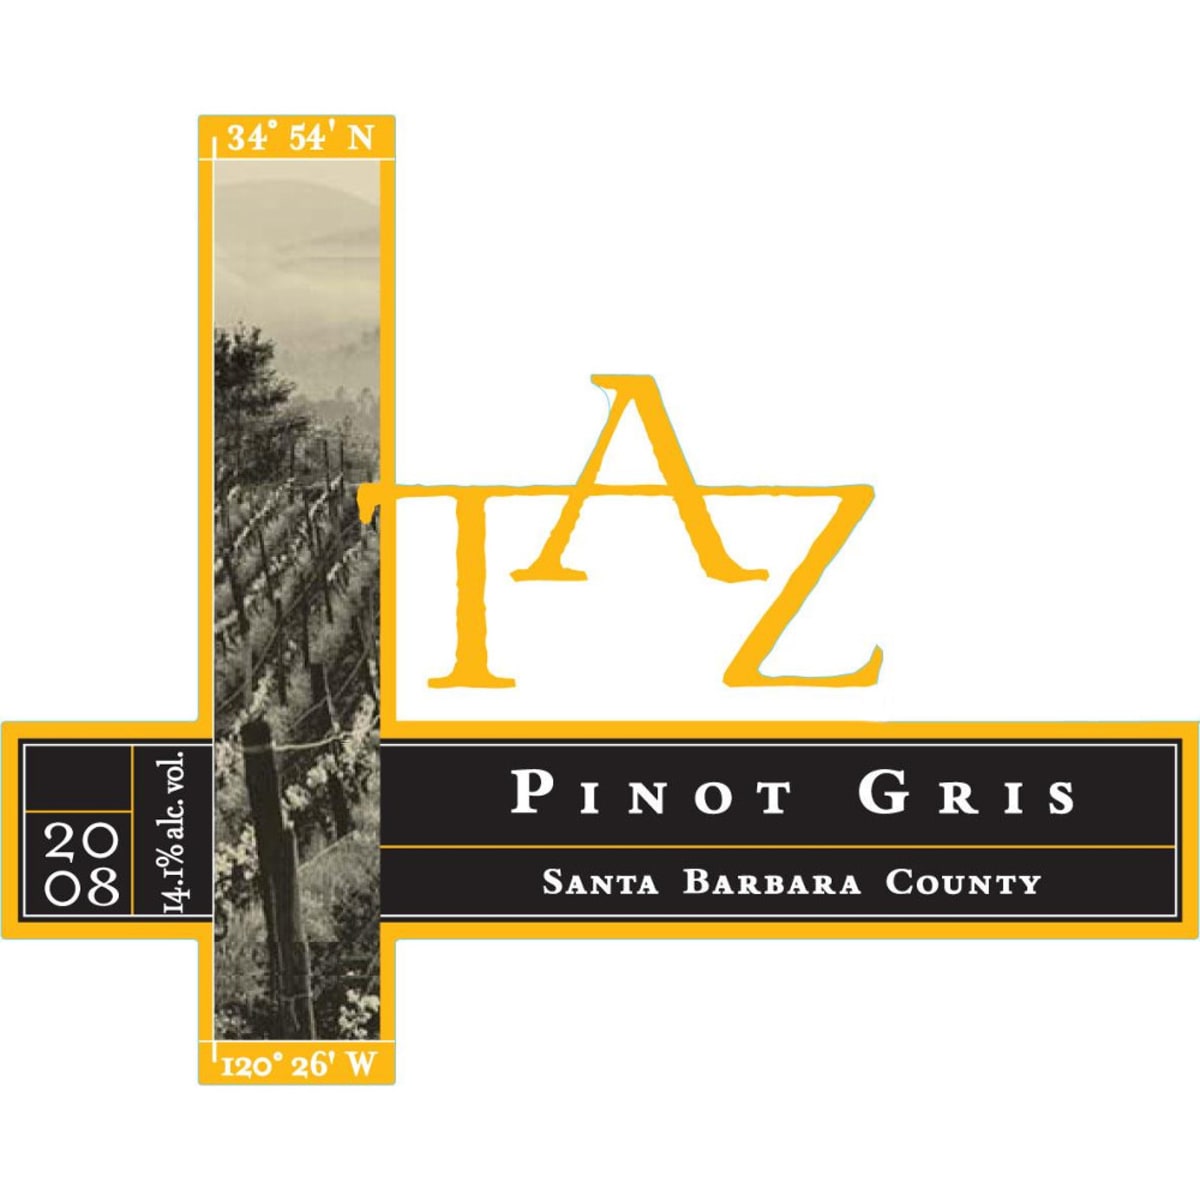 TAZ Pinot Gris 2008 Front Label